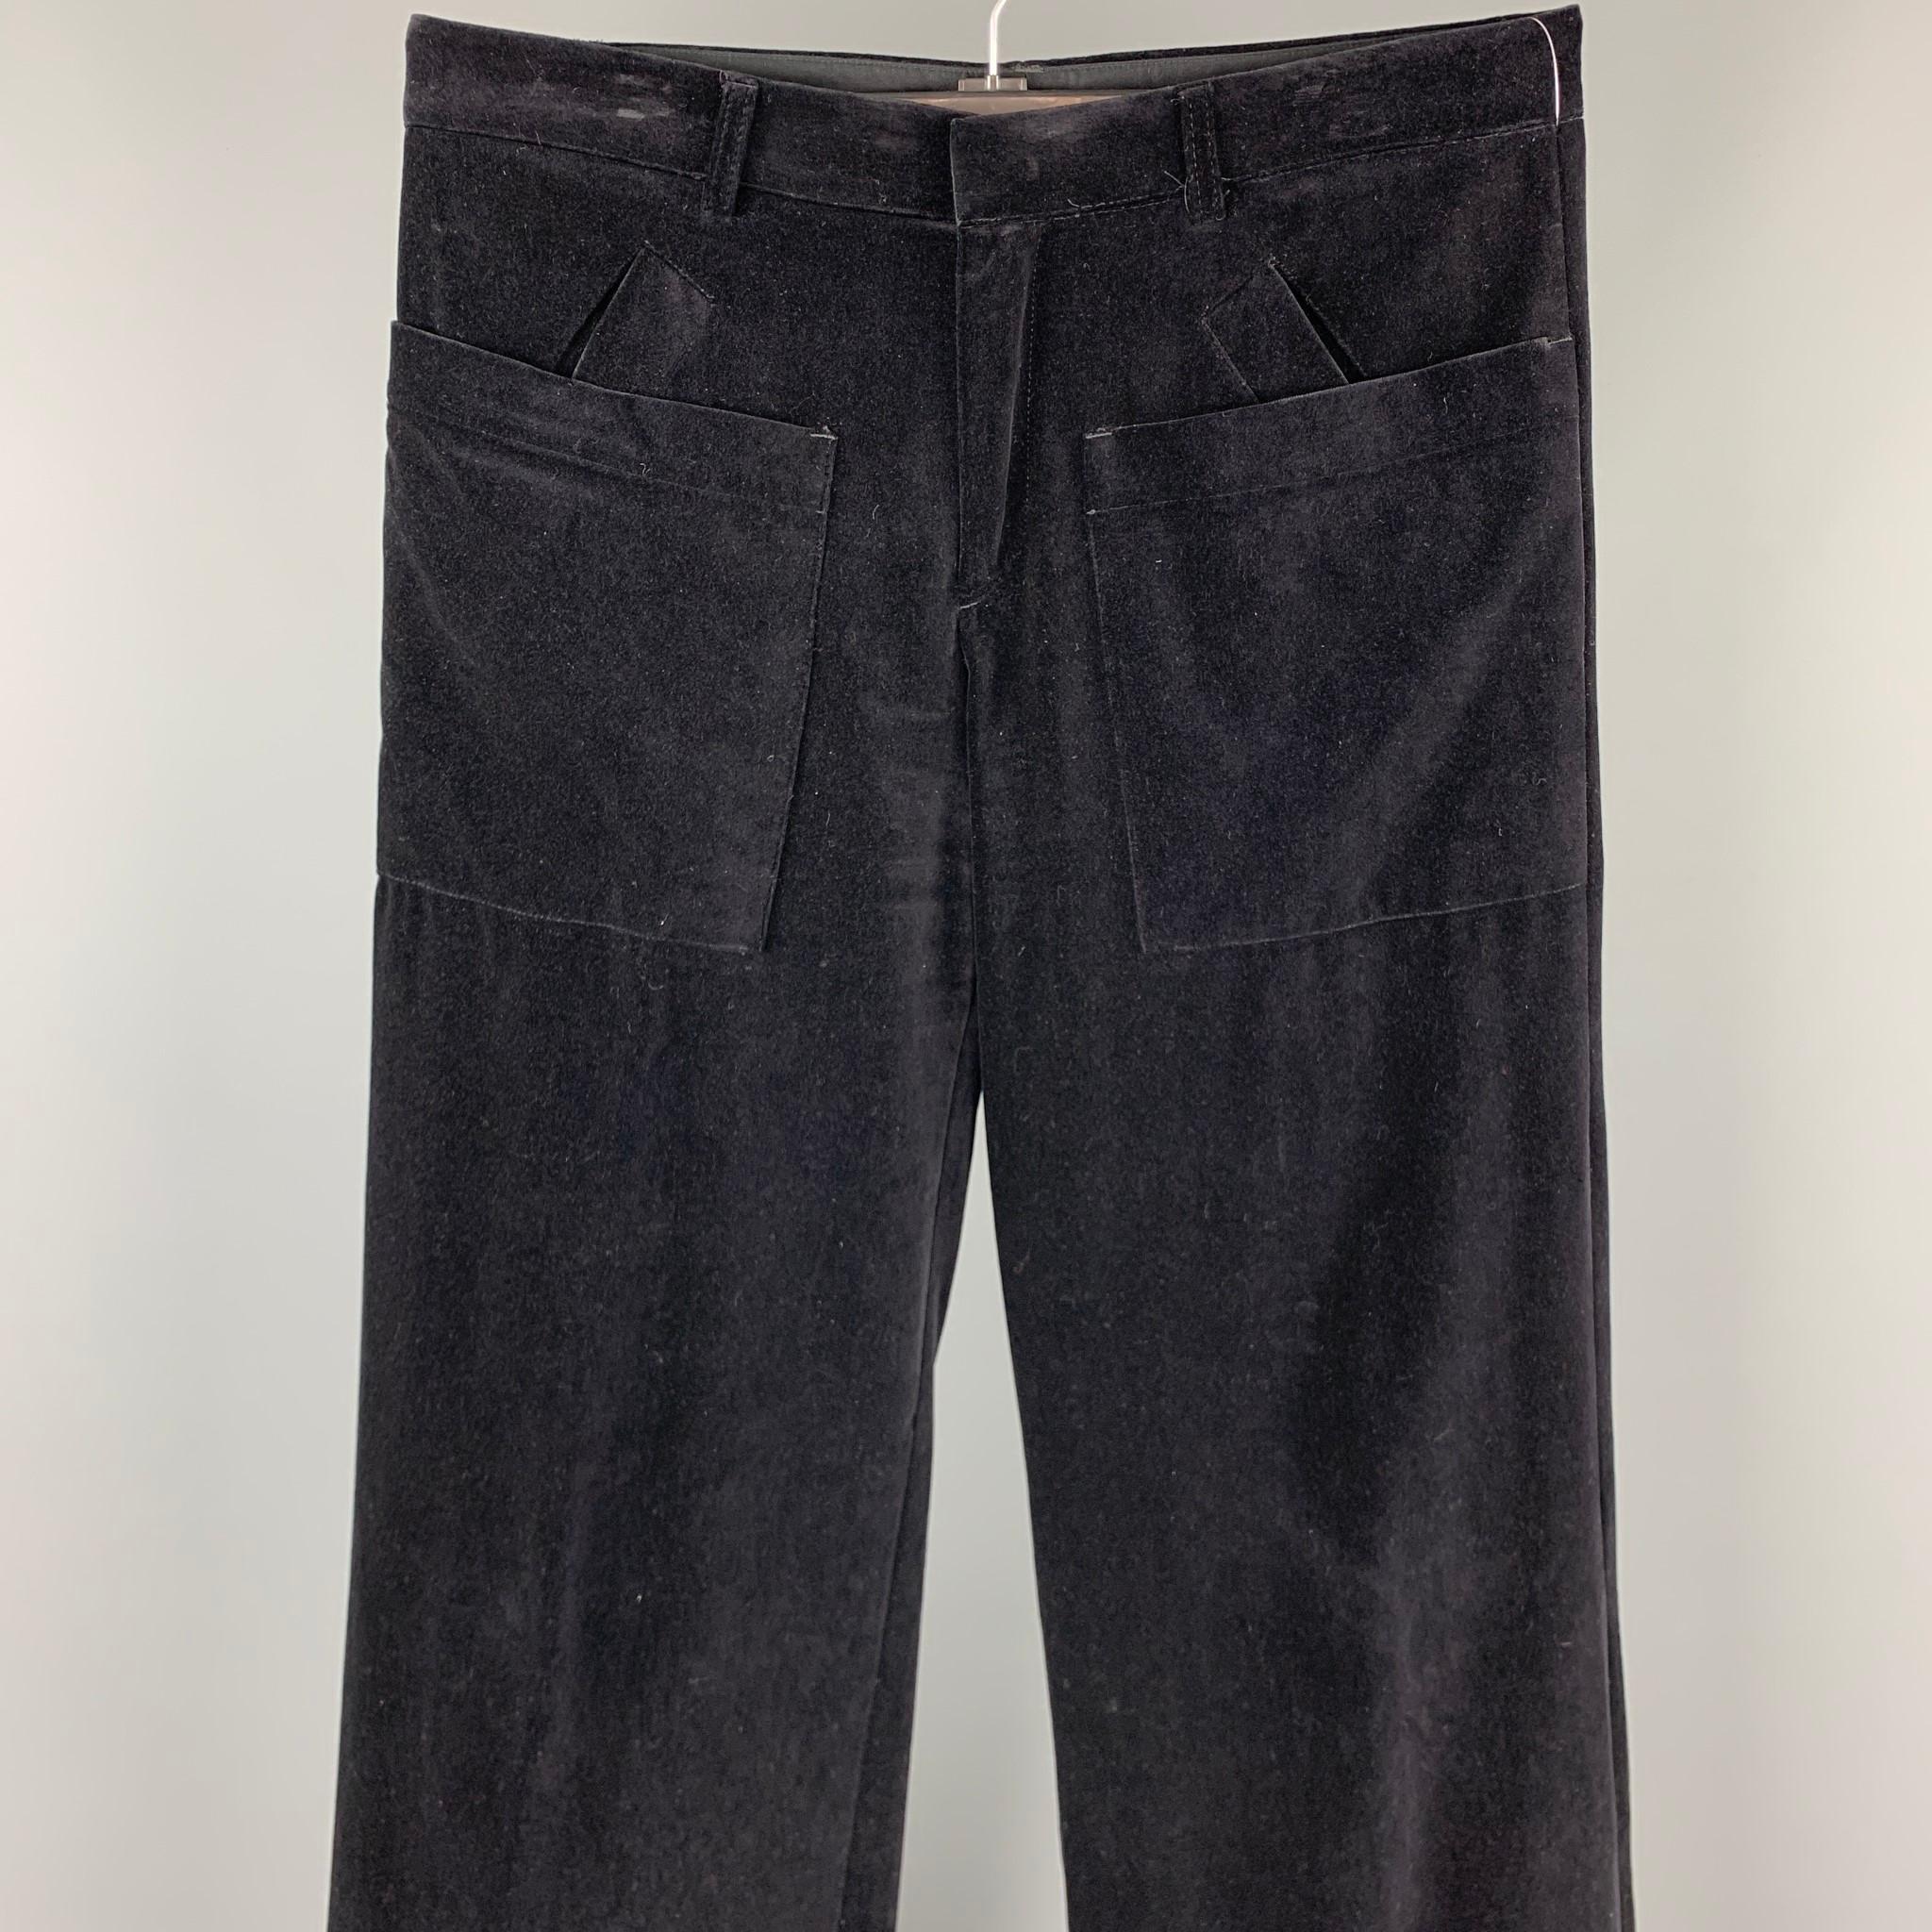 JEAN PAUL GAULTIER dress pants comes in a black cotton velvet featuring a wide leg style, front patch pockets, cuffed leg, and a zip fly closure. Made in Italy.

Very Good Pre-Owned Condition.
Marked: I 50 / E 50 / GB 40 / US